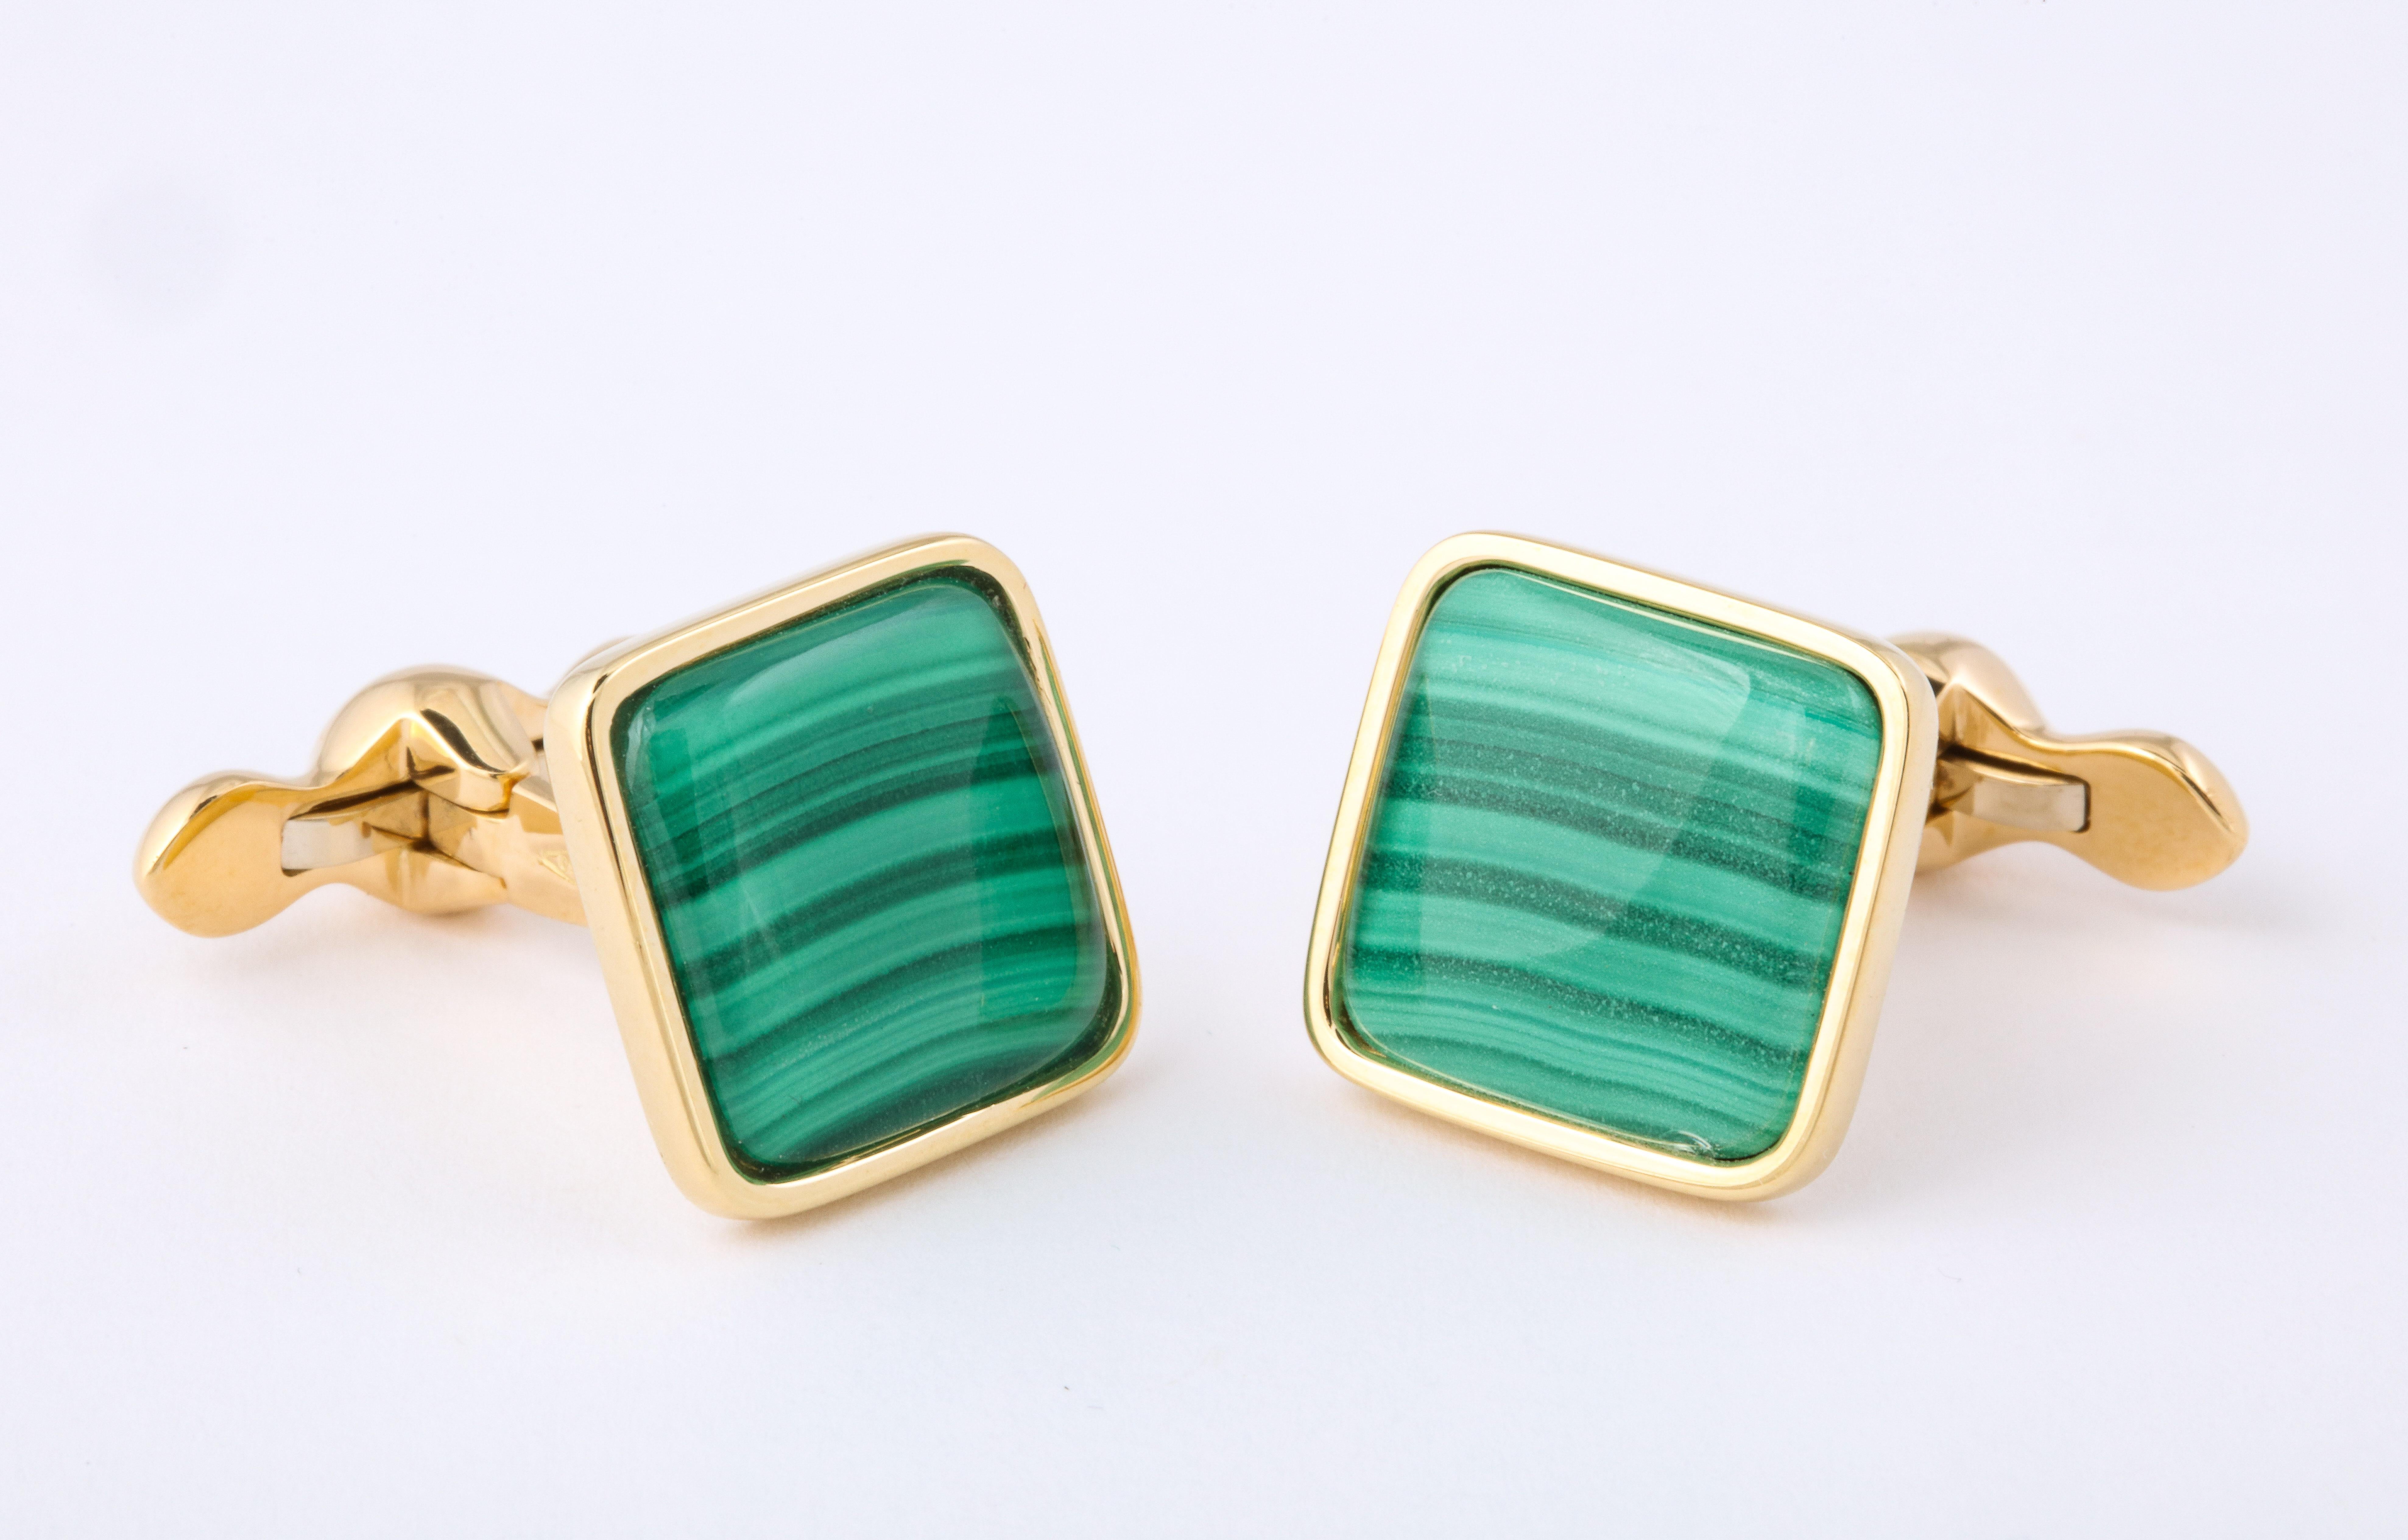 A thin slice of natural malachite is mounted under a bombé piece of rock crystal quartz.  The result is a slight magnifying effect combined with lovely volume.  The spring backs are accented with nephrite jade cabochons in a complimentary